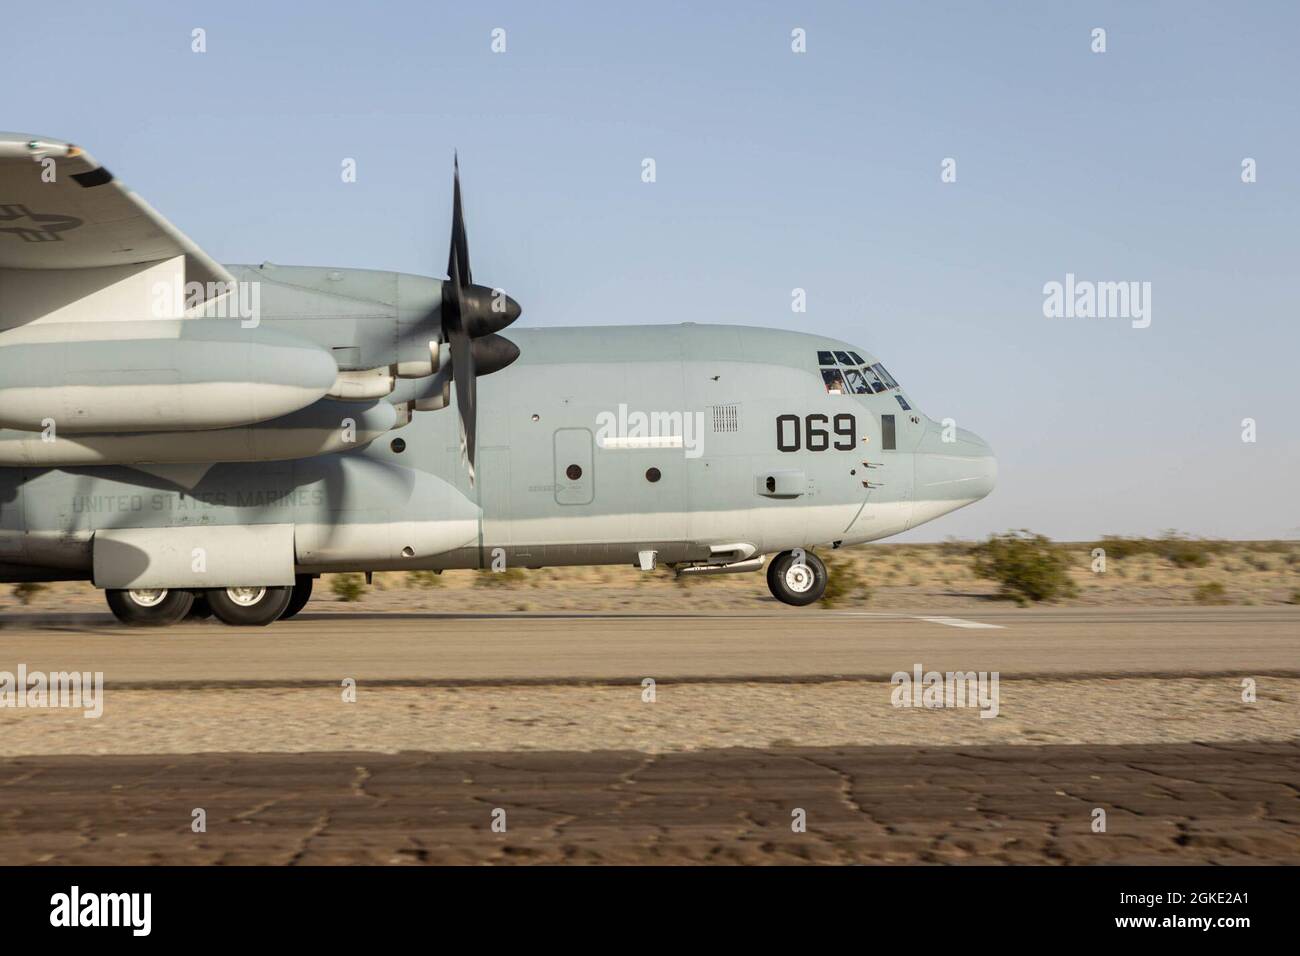 A U.S. Marine Corps KC-130J Hercules, with Marine Aviation Weapons and Tactics Squadron One (MAWTS-1), prepares to launch in support of Weapons and Tactics Instructor (WTI) course 2-21, at Auxiliary Airfield II, near Yuma, Ariz., March 24, 2021.  The WTI course is a seven-week training event hosted by MAWTS-1, providing standardized advanced tactical training and certification of unit instructor qualifications to support Marine aviation training and readiness, and assists in developing and employing aviation weapons and tactics. Stock Photo